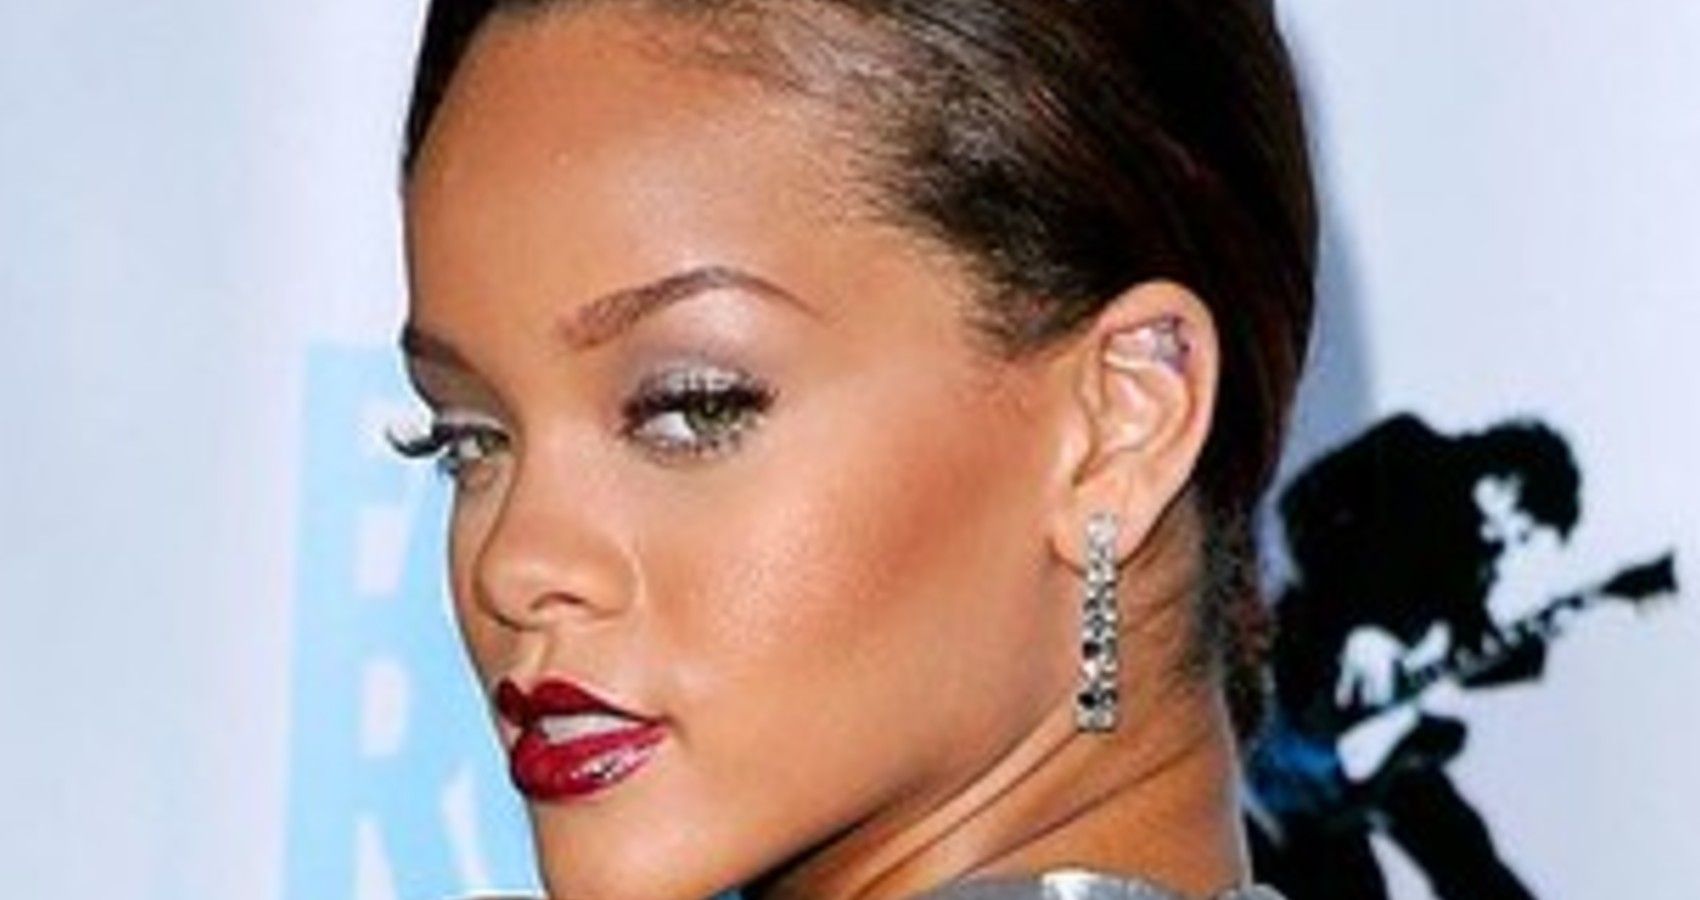 3. Rihanna's Breast Tattoo: The Evolution of Her Ink - wide 5